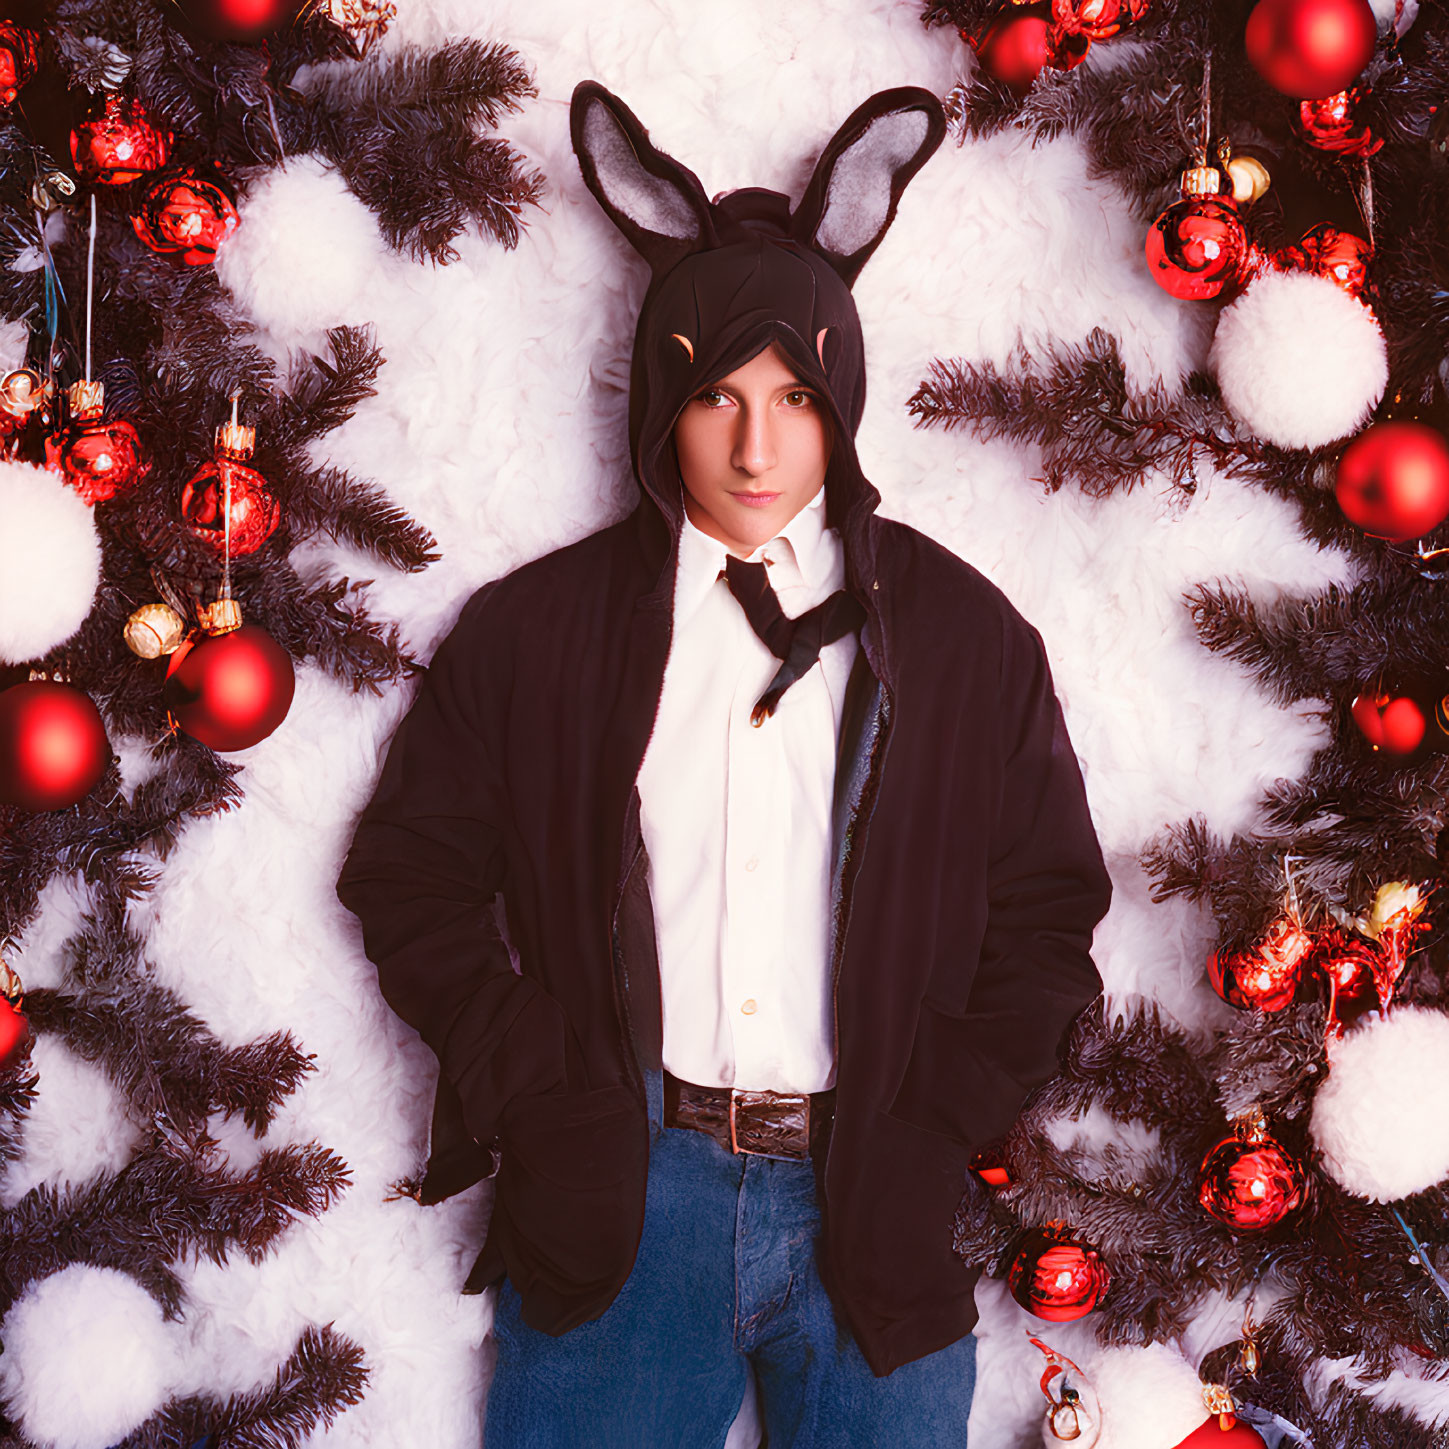 Person in Bunny-Eared Hood with Christmas Decorations